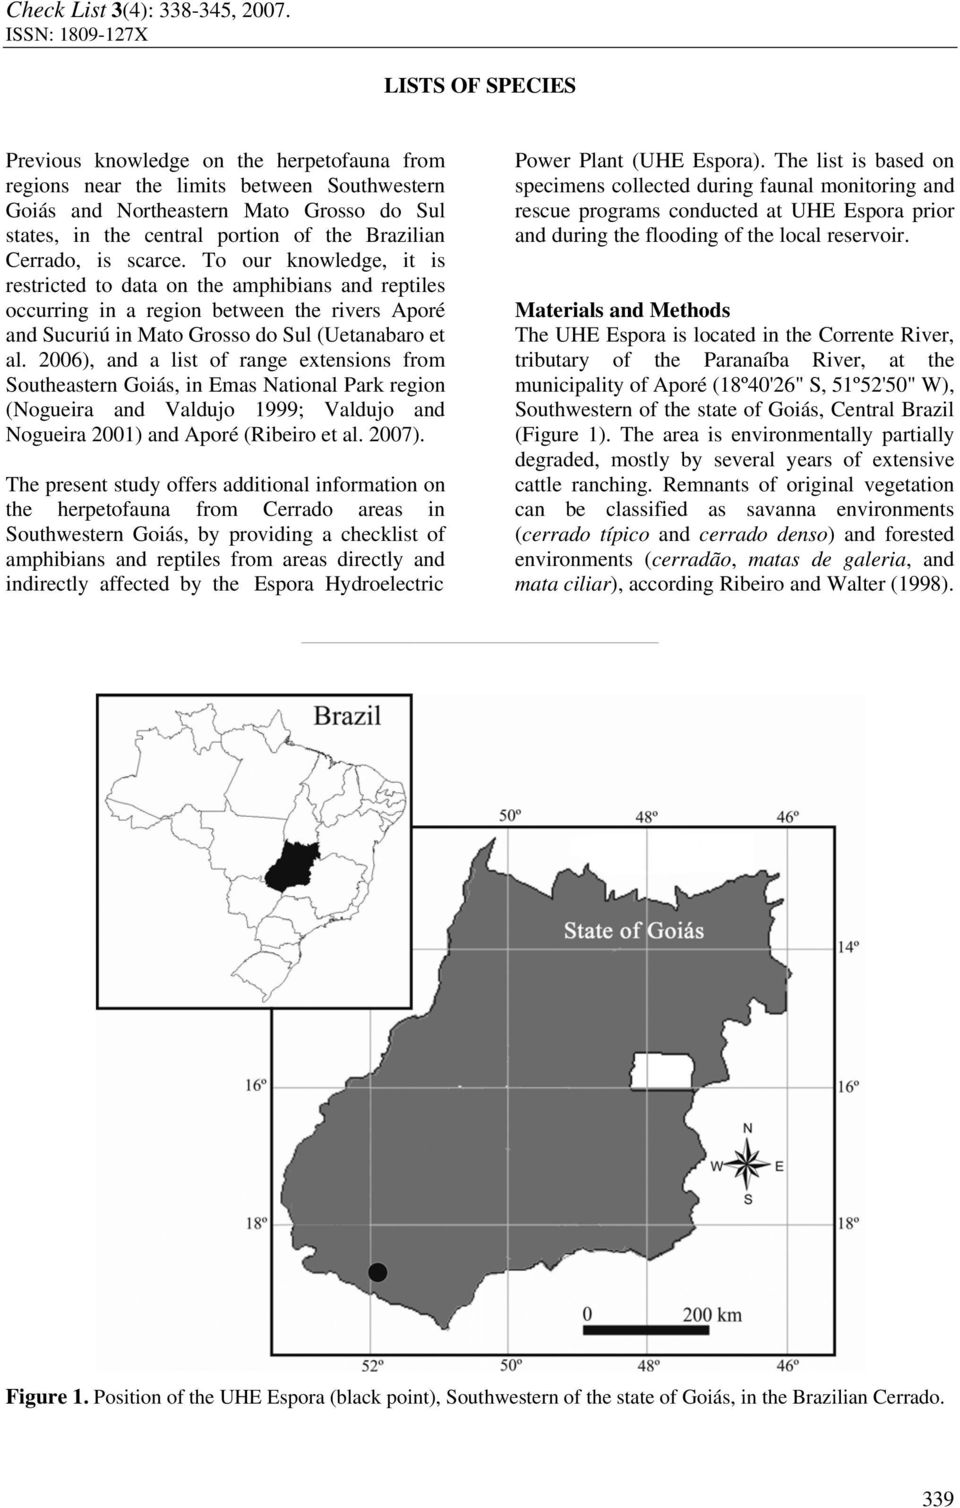 2006), and a list of range extensions from Southeastern Goiás, in Emas National Park region (Nogueira and Valdujo 1999; Valdujo and Nogueira 2001) and Aporé (Ribeiro et al. 2007).